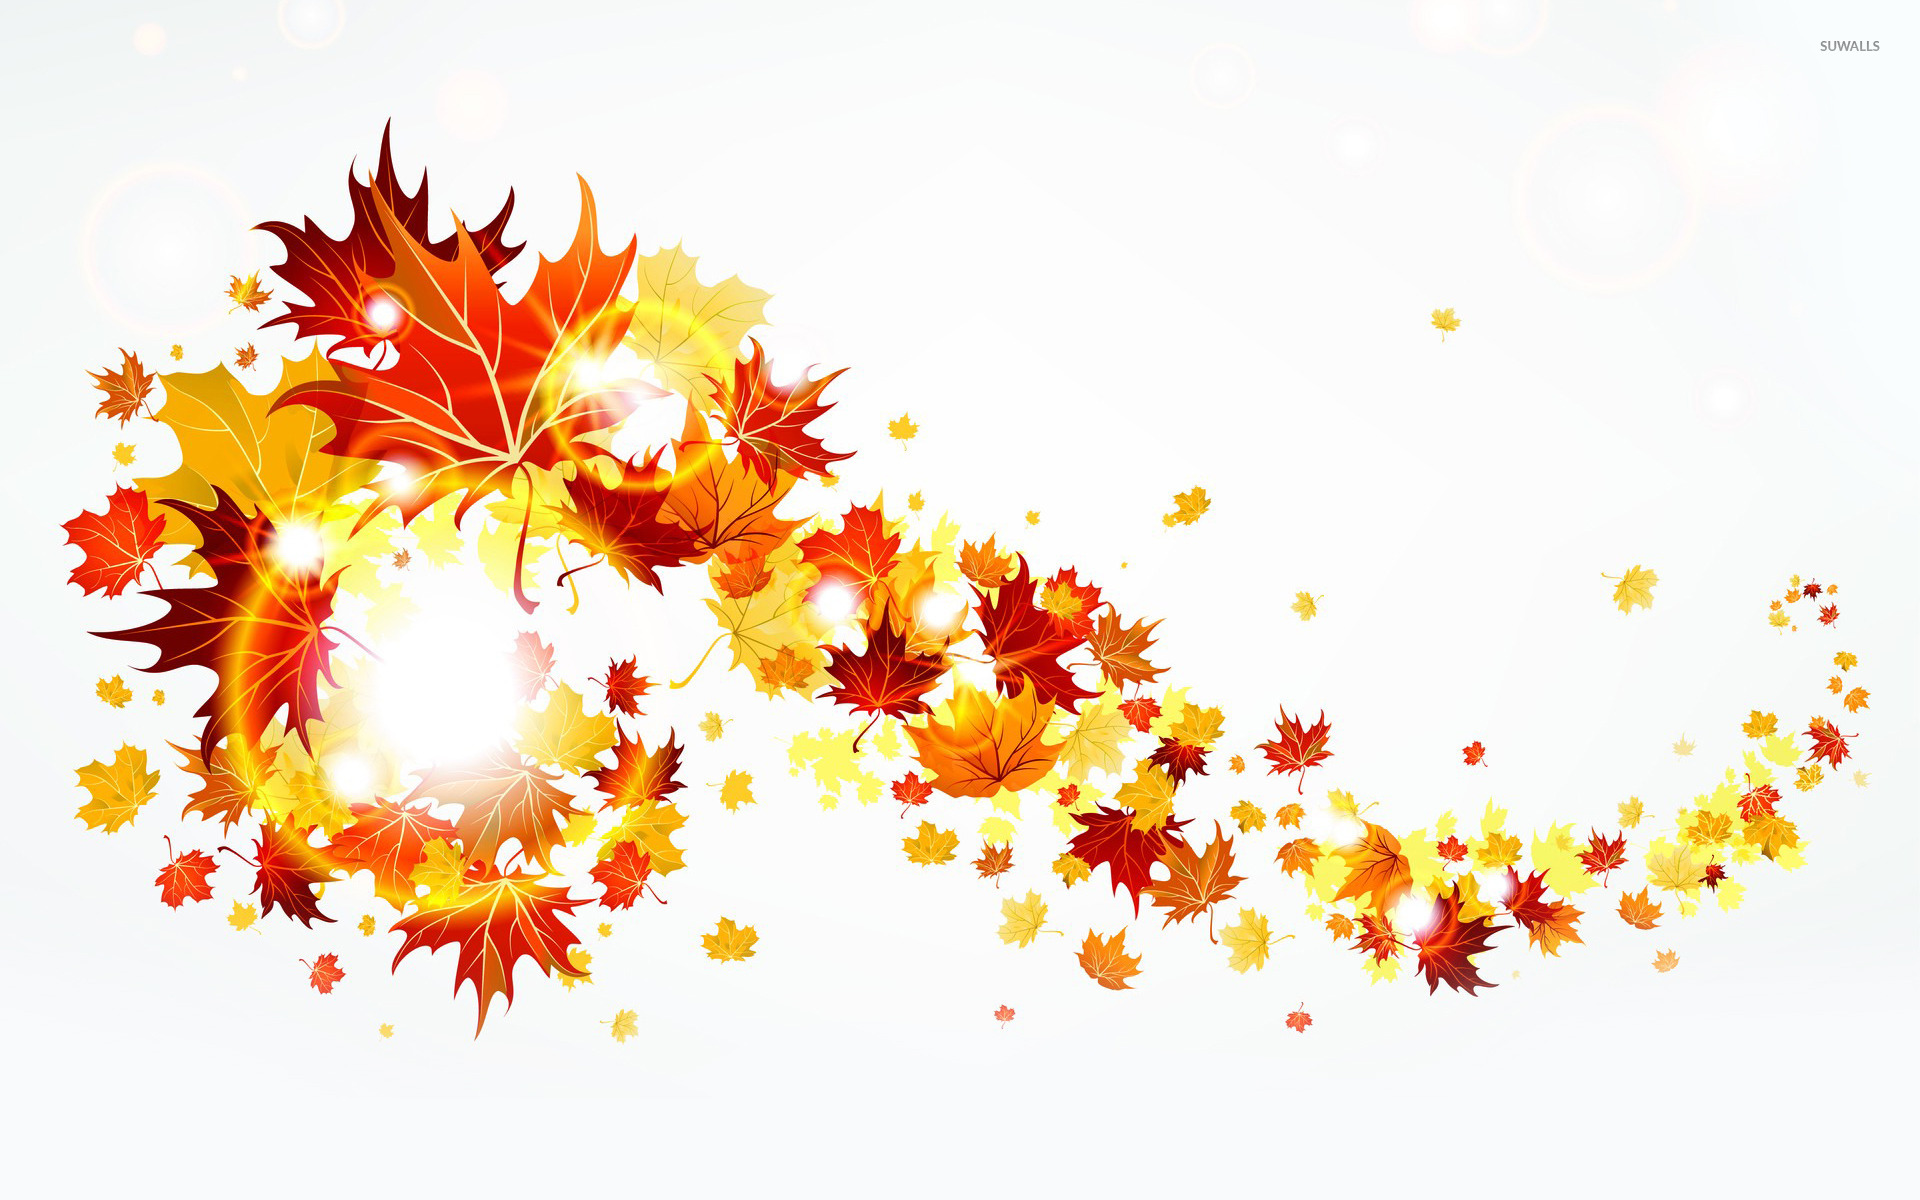 Autumn leaves [2] wallpaper - Vector wallpapers - #20413